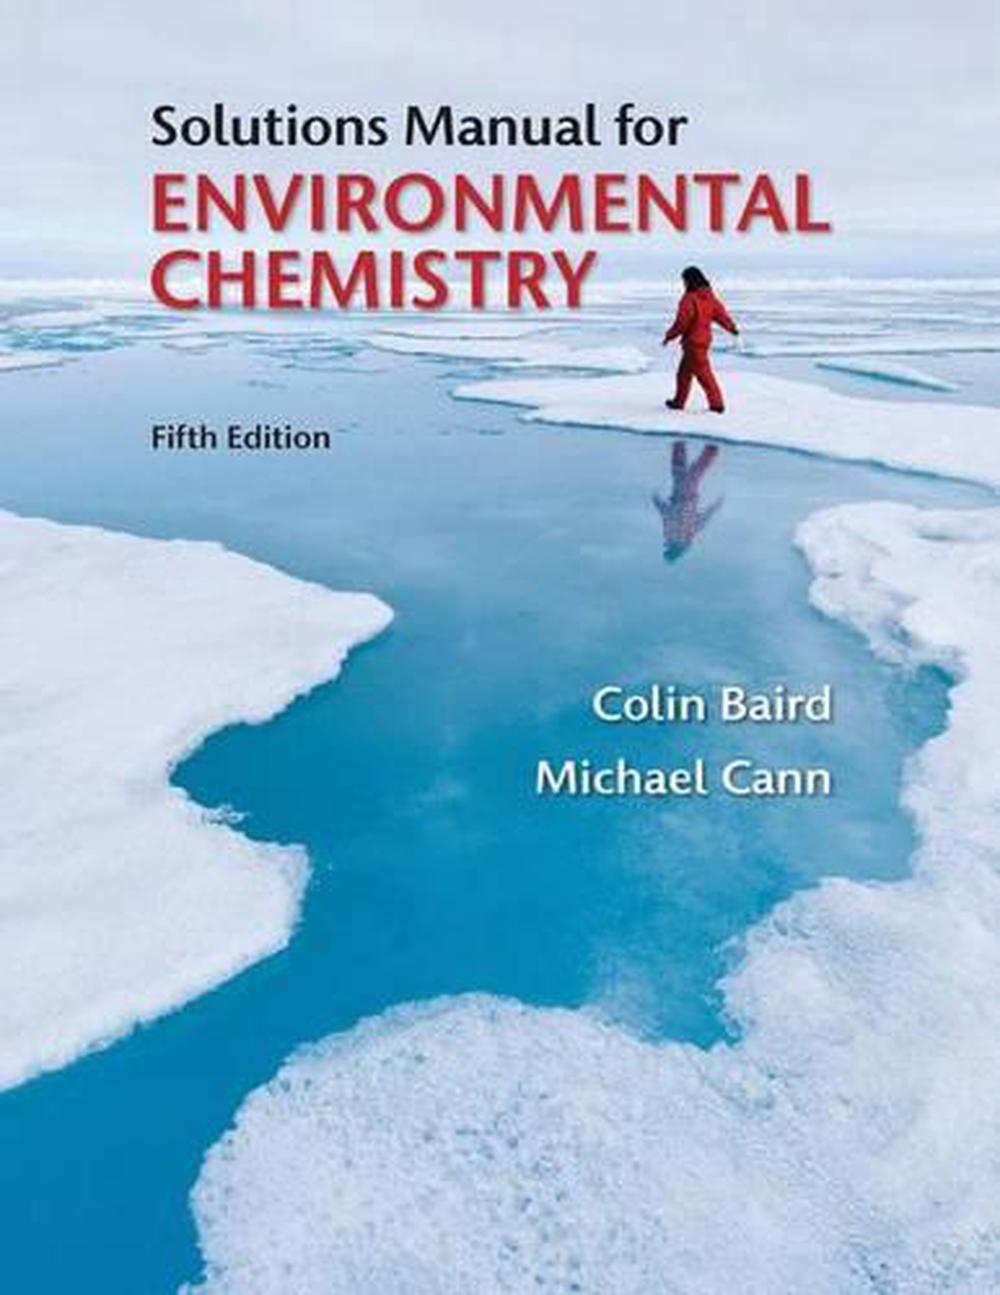 Student Solutions Manual for Environmental Chemistry 5th Edition by